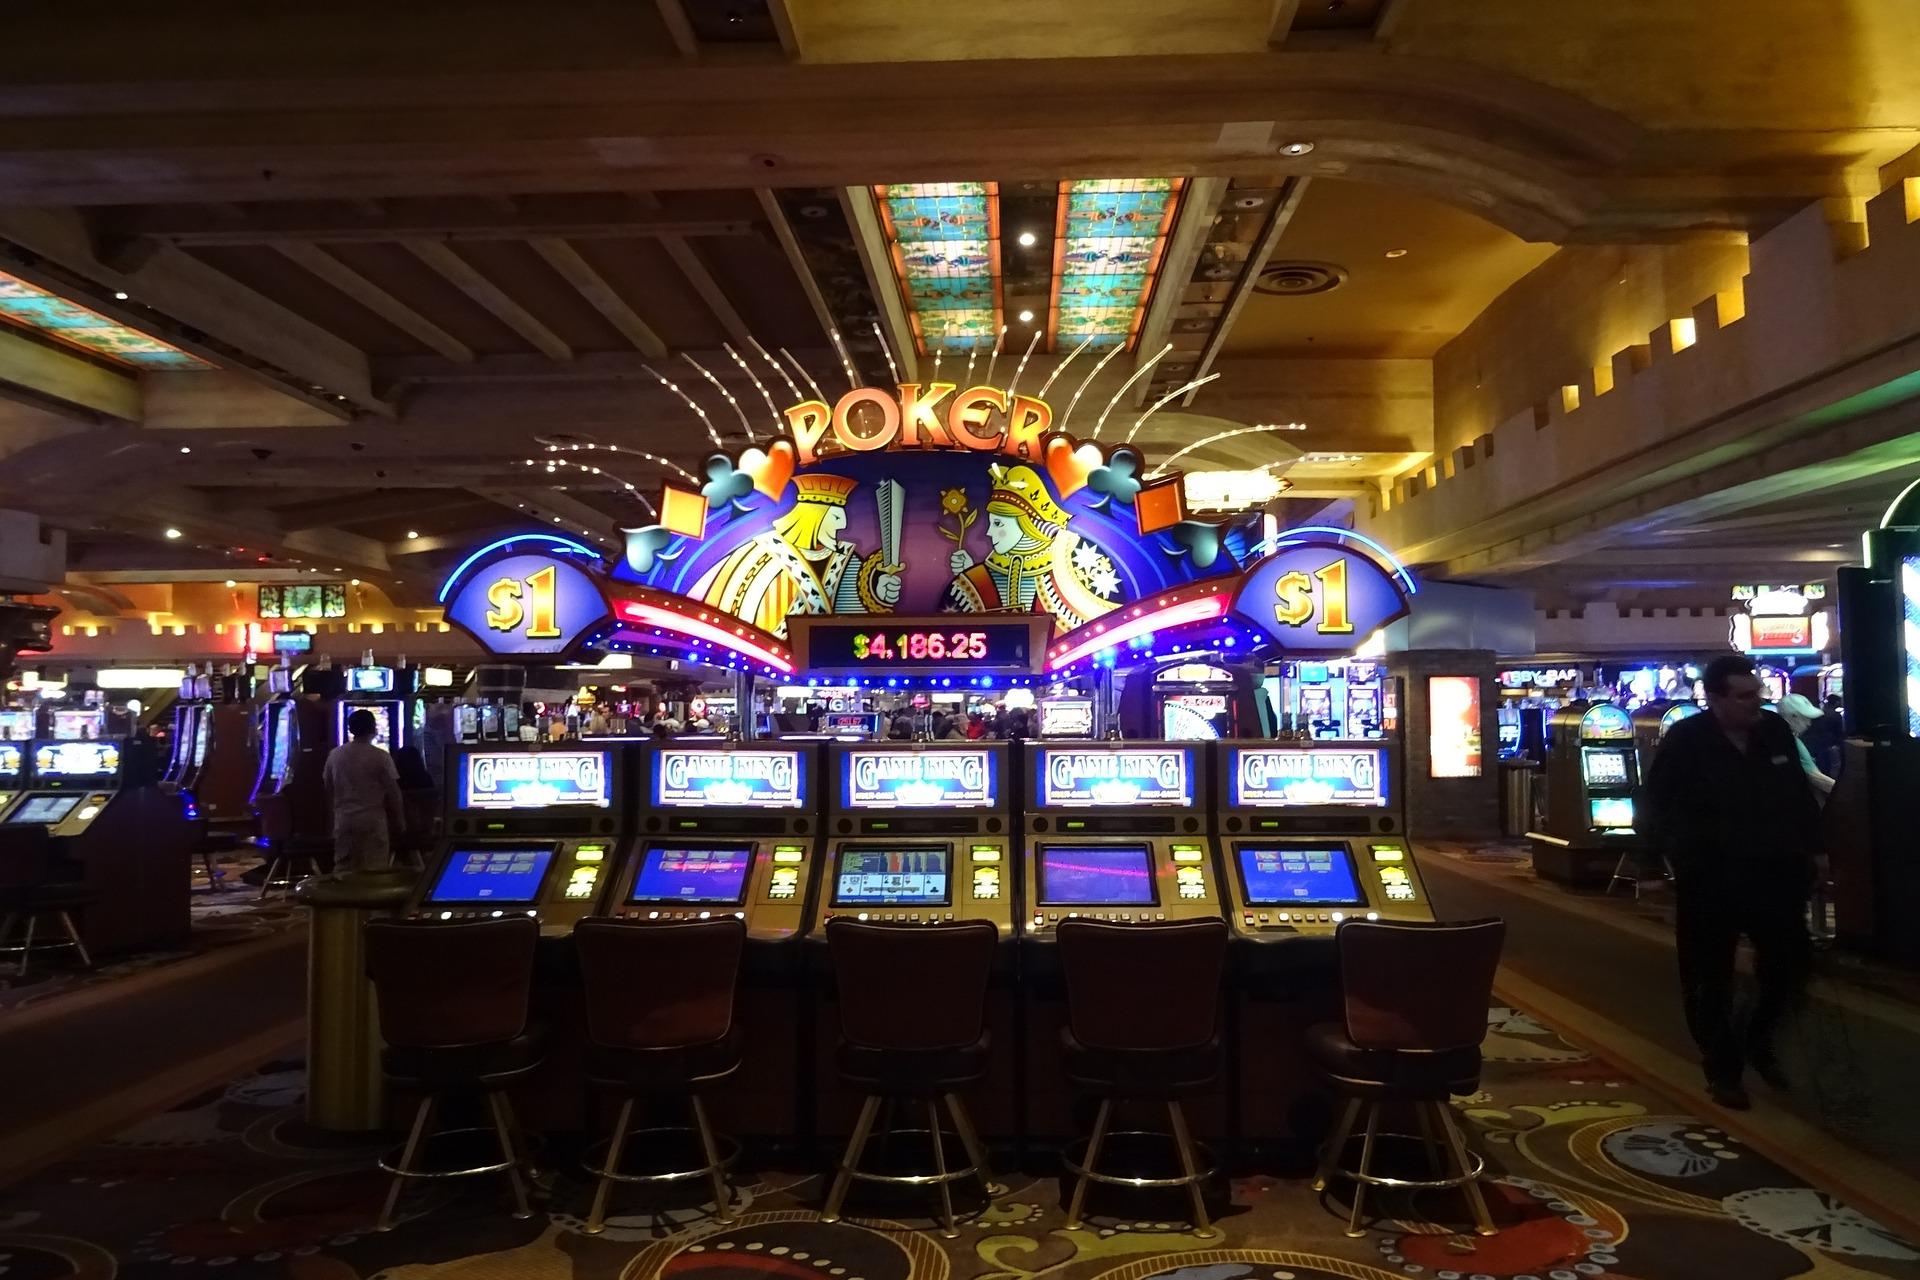 The Stuff About casinos You Probably Hadn't Considered. And Really Should